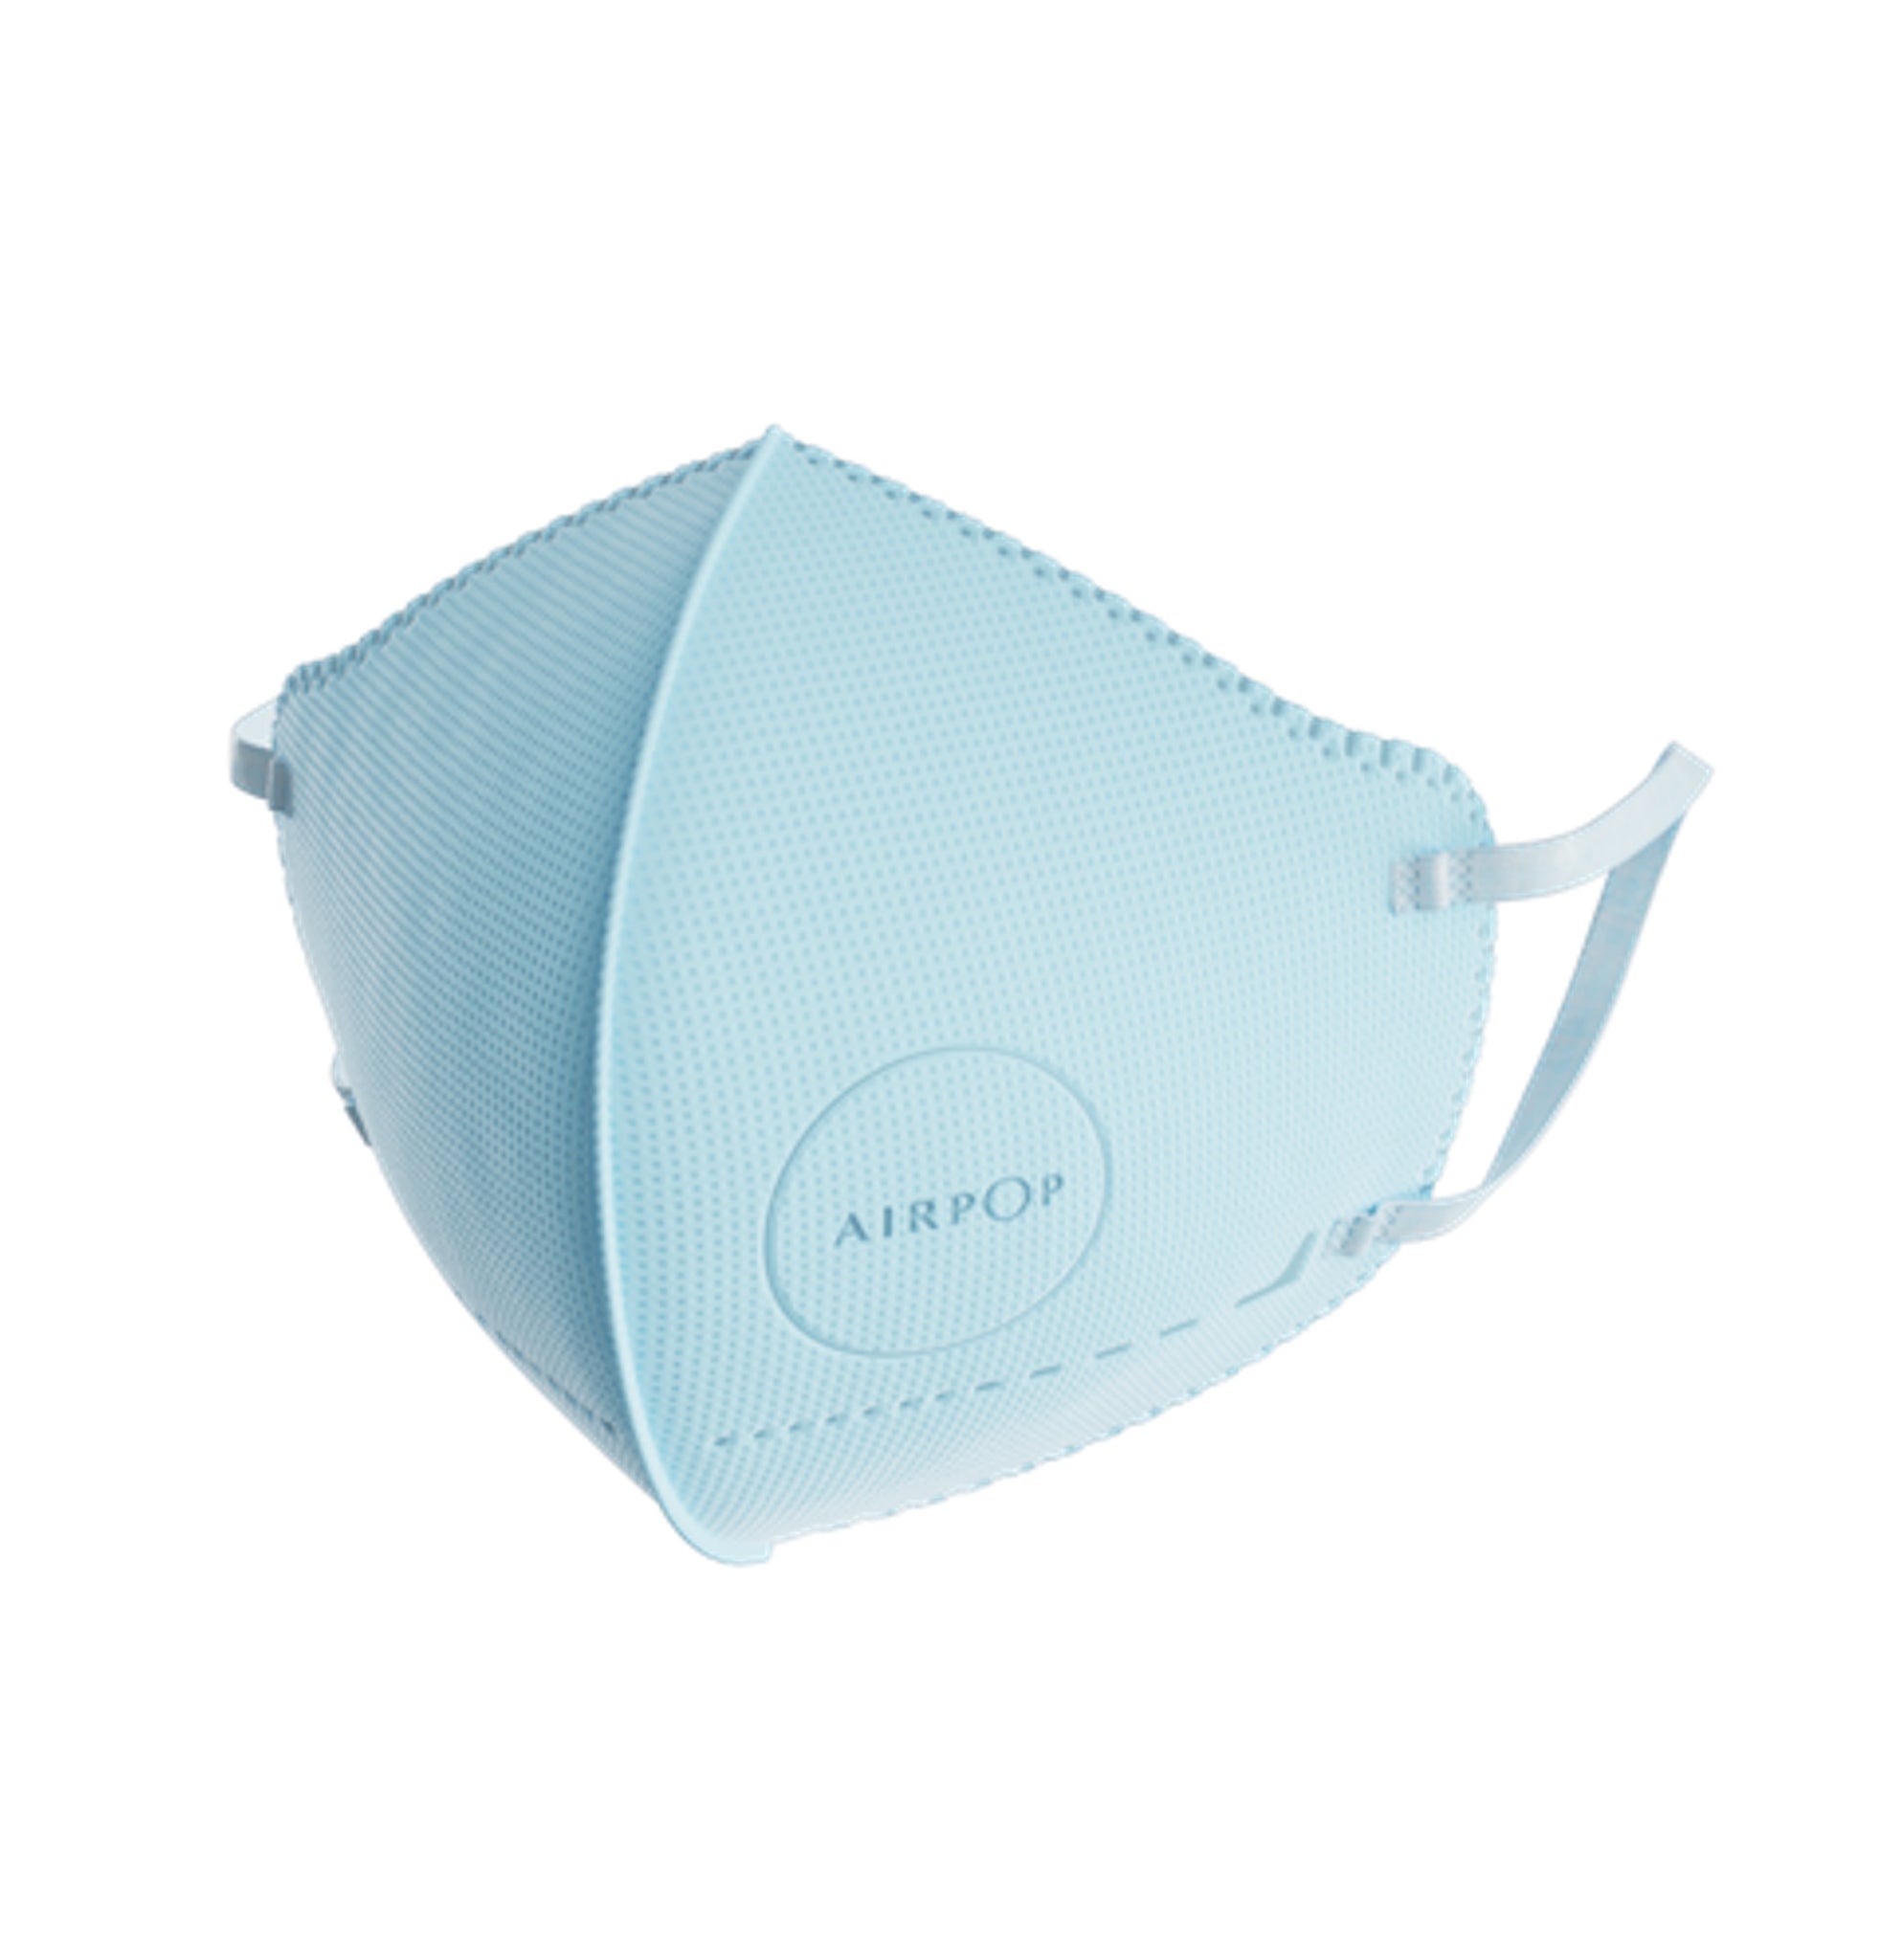 An AirPop Kids Mask, a breathable and comfortable blue face mask on a white background.